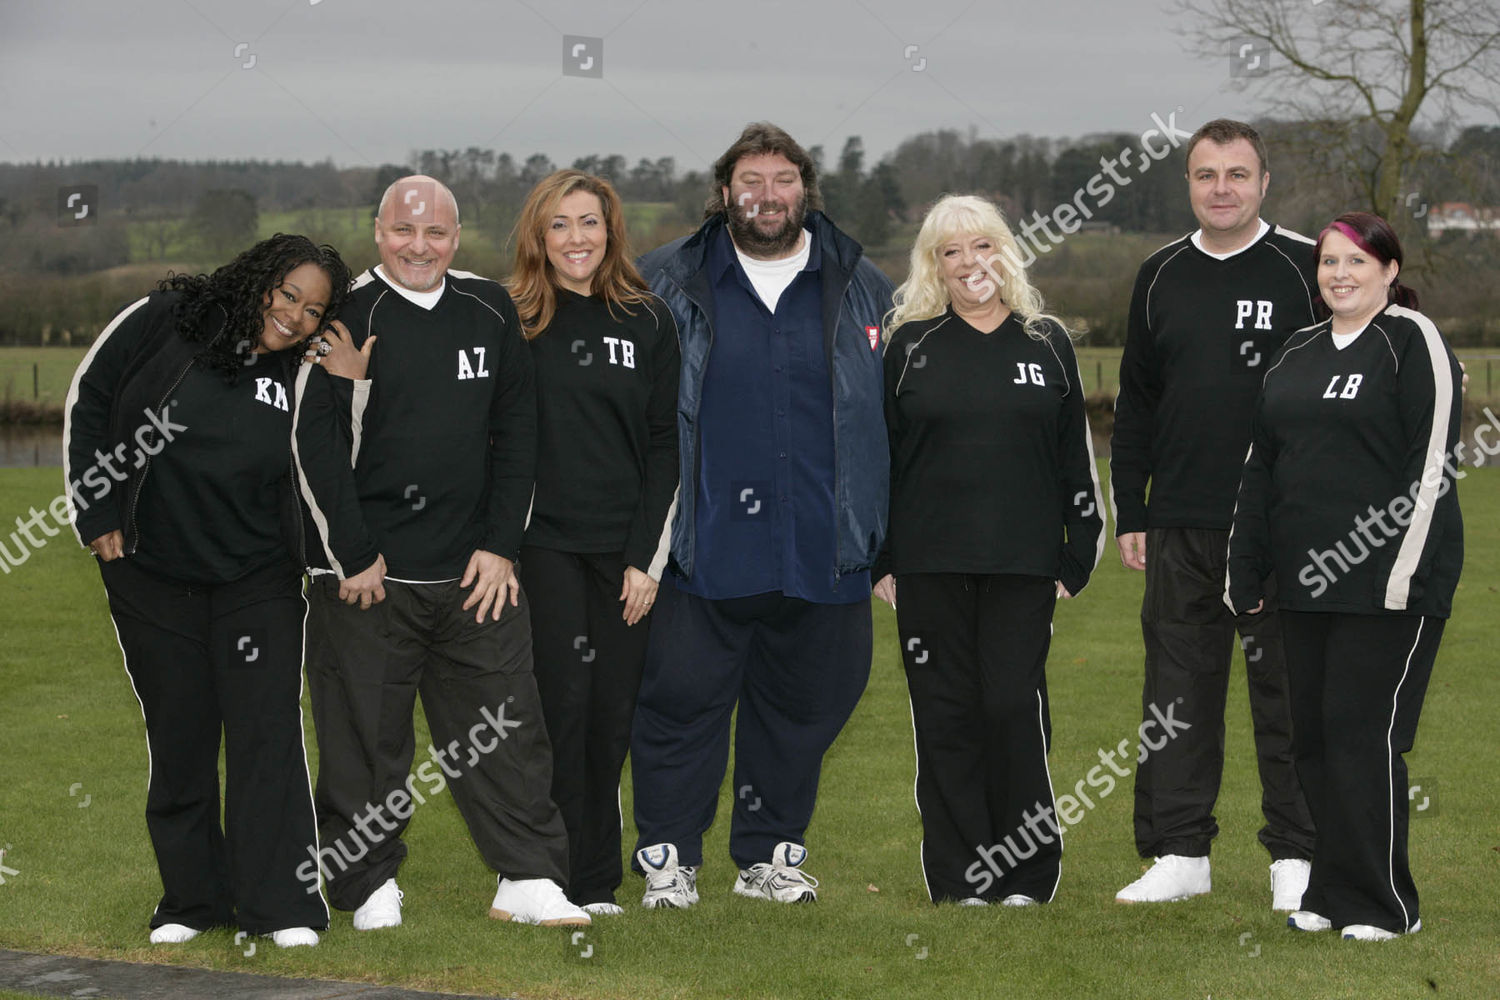 Itv Celebrity Fit Club On Tuesday Editorial Stock Photo - Stock Image |  Shutterstock